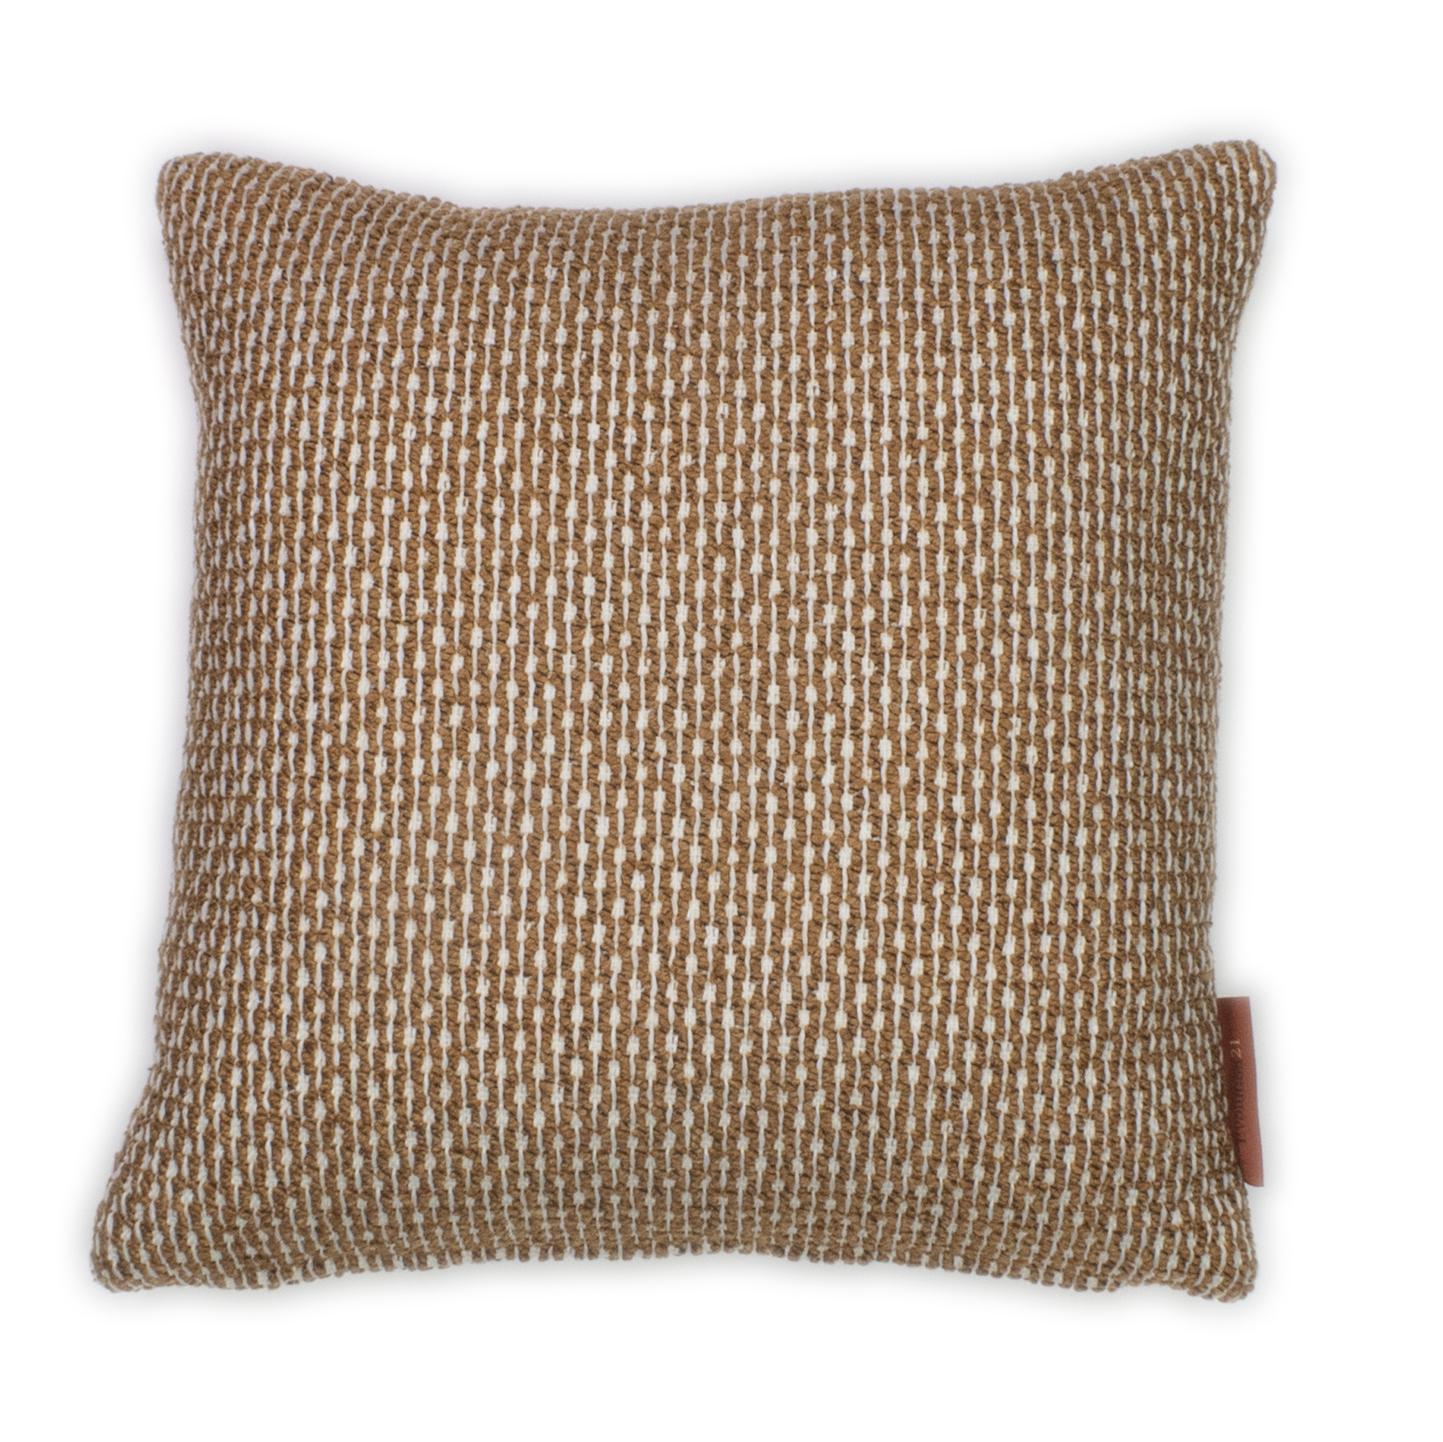 Modern Cushion / Pillow Pampas Sand by Evolution21 For Sale